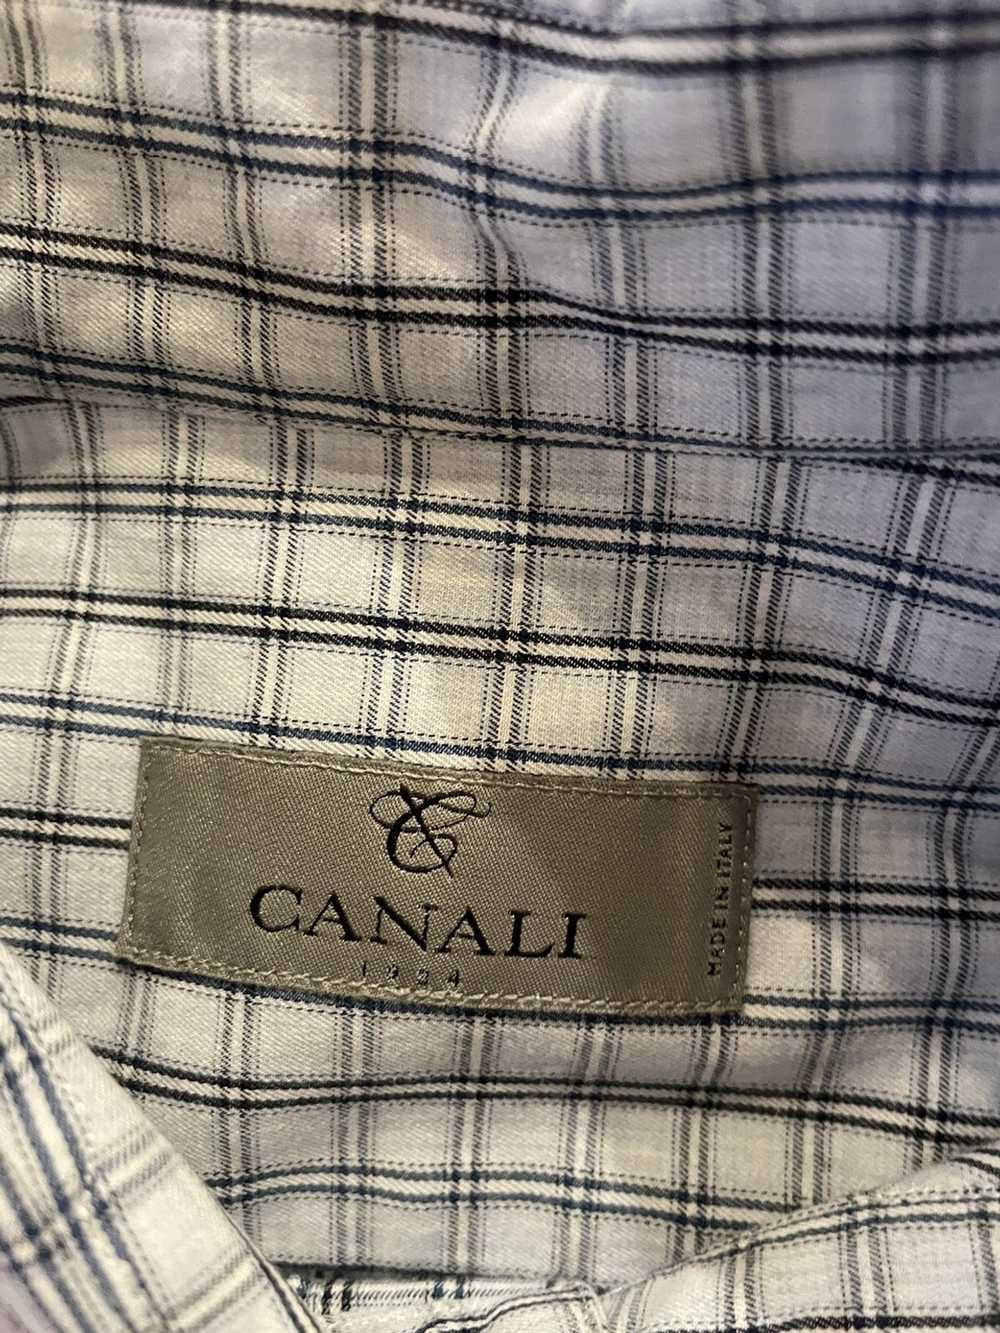 Canali Double Grid Check Shirt - image 3